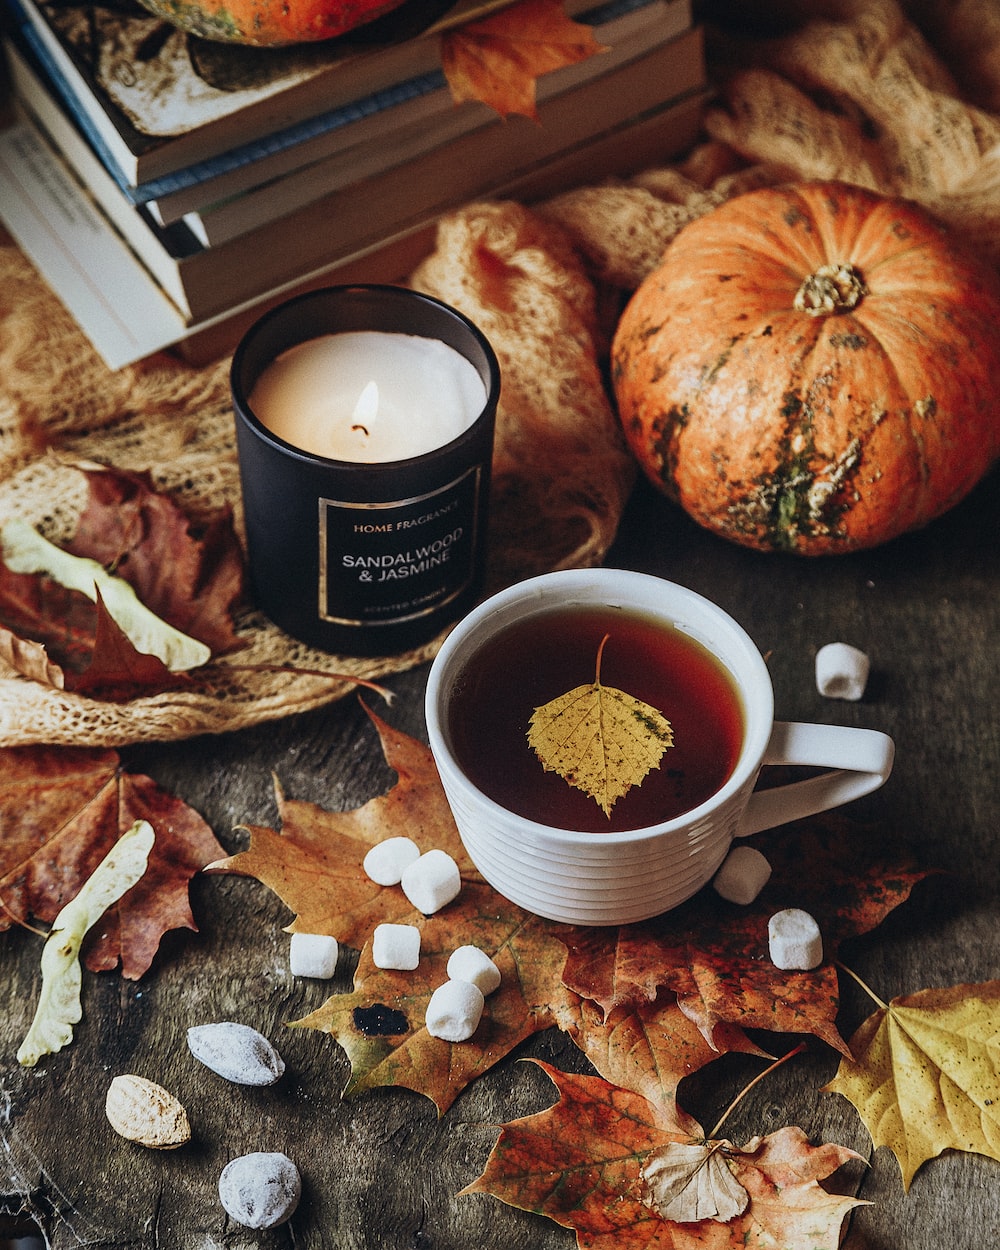 Cozy Fall Picture. Download Free Image